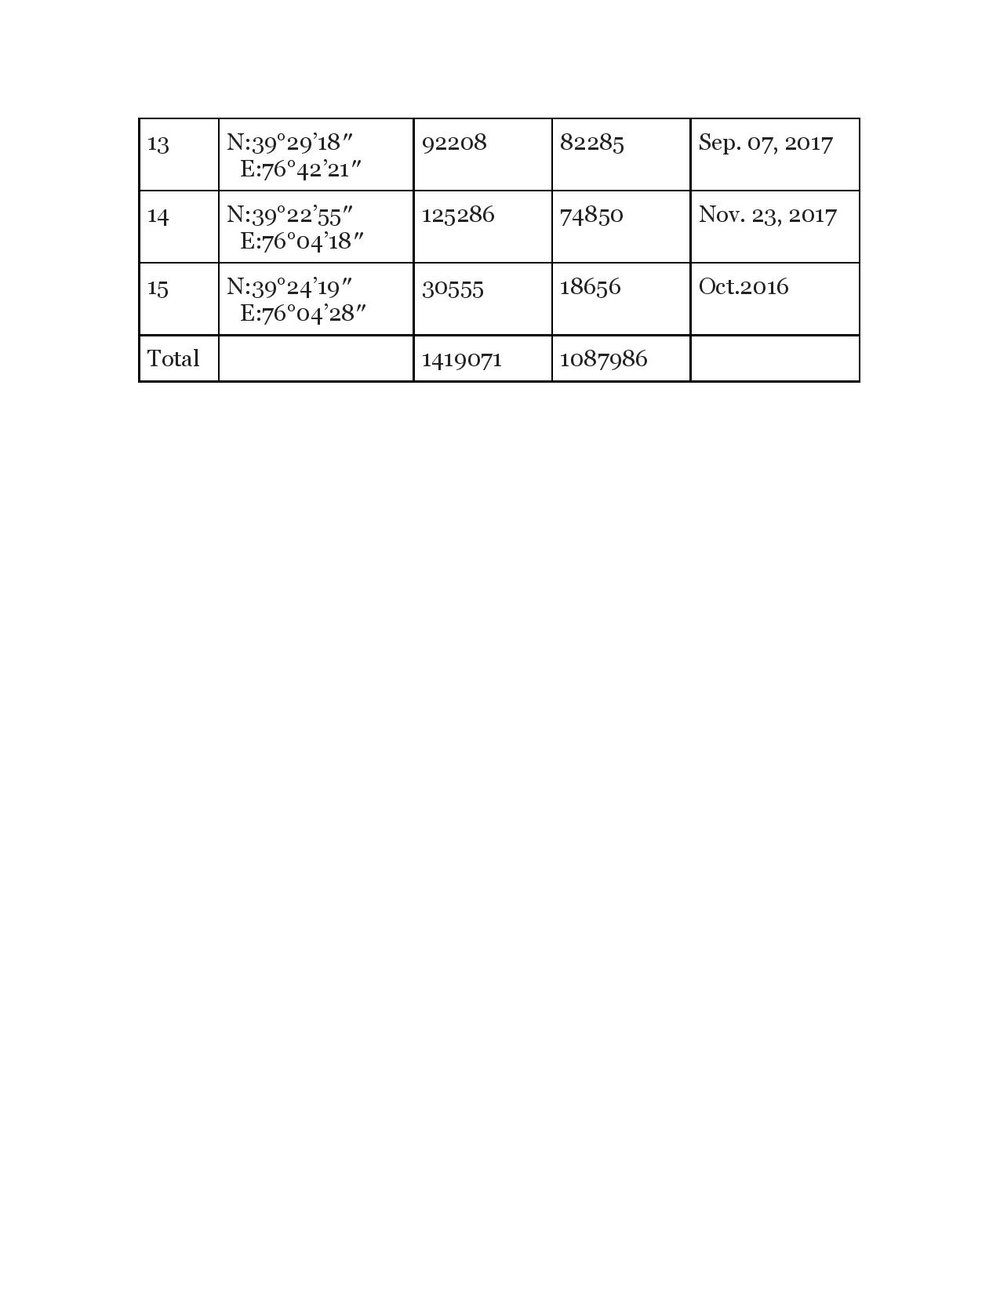 A table created by Li Fang with information about possible re-education camps identified by Li Fang.